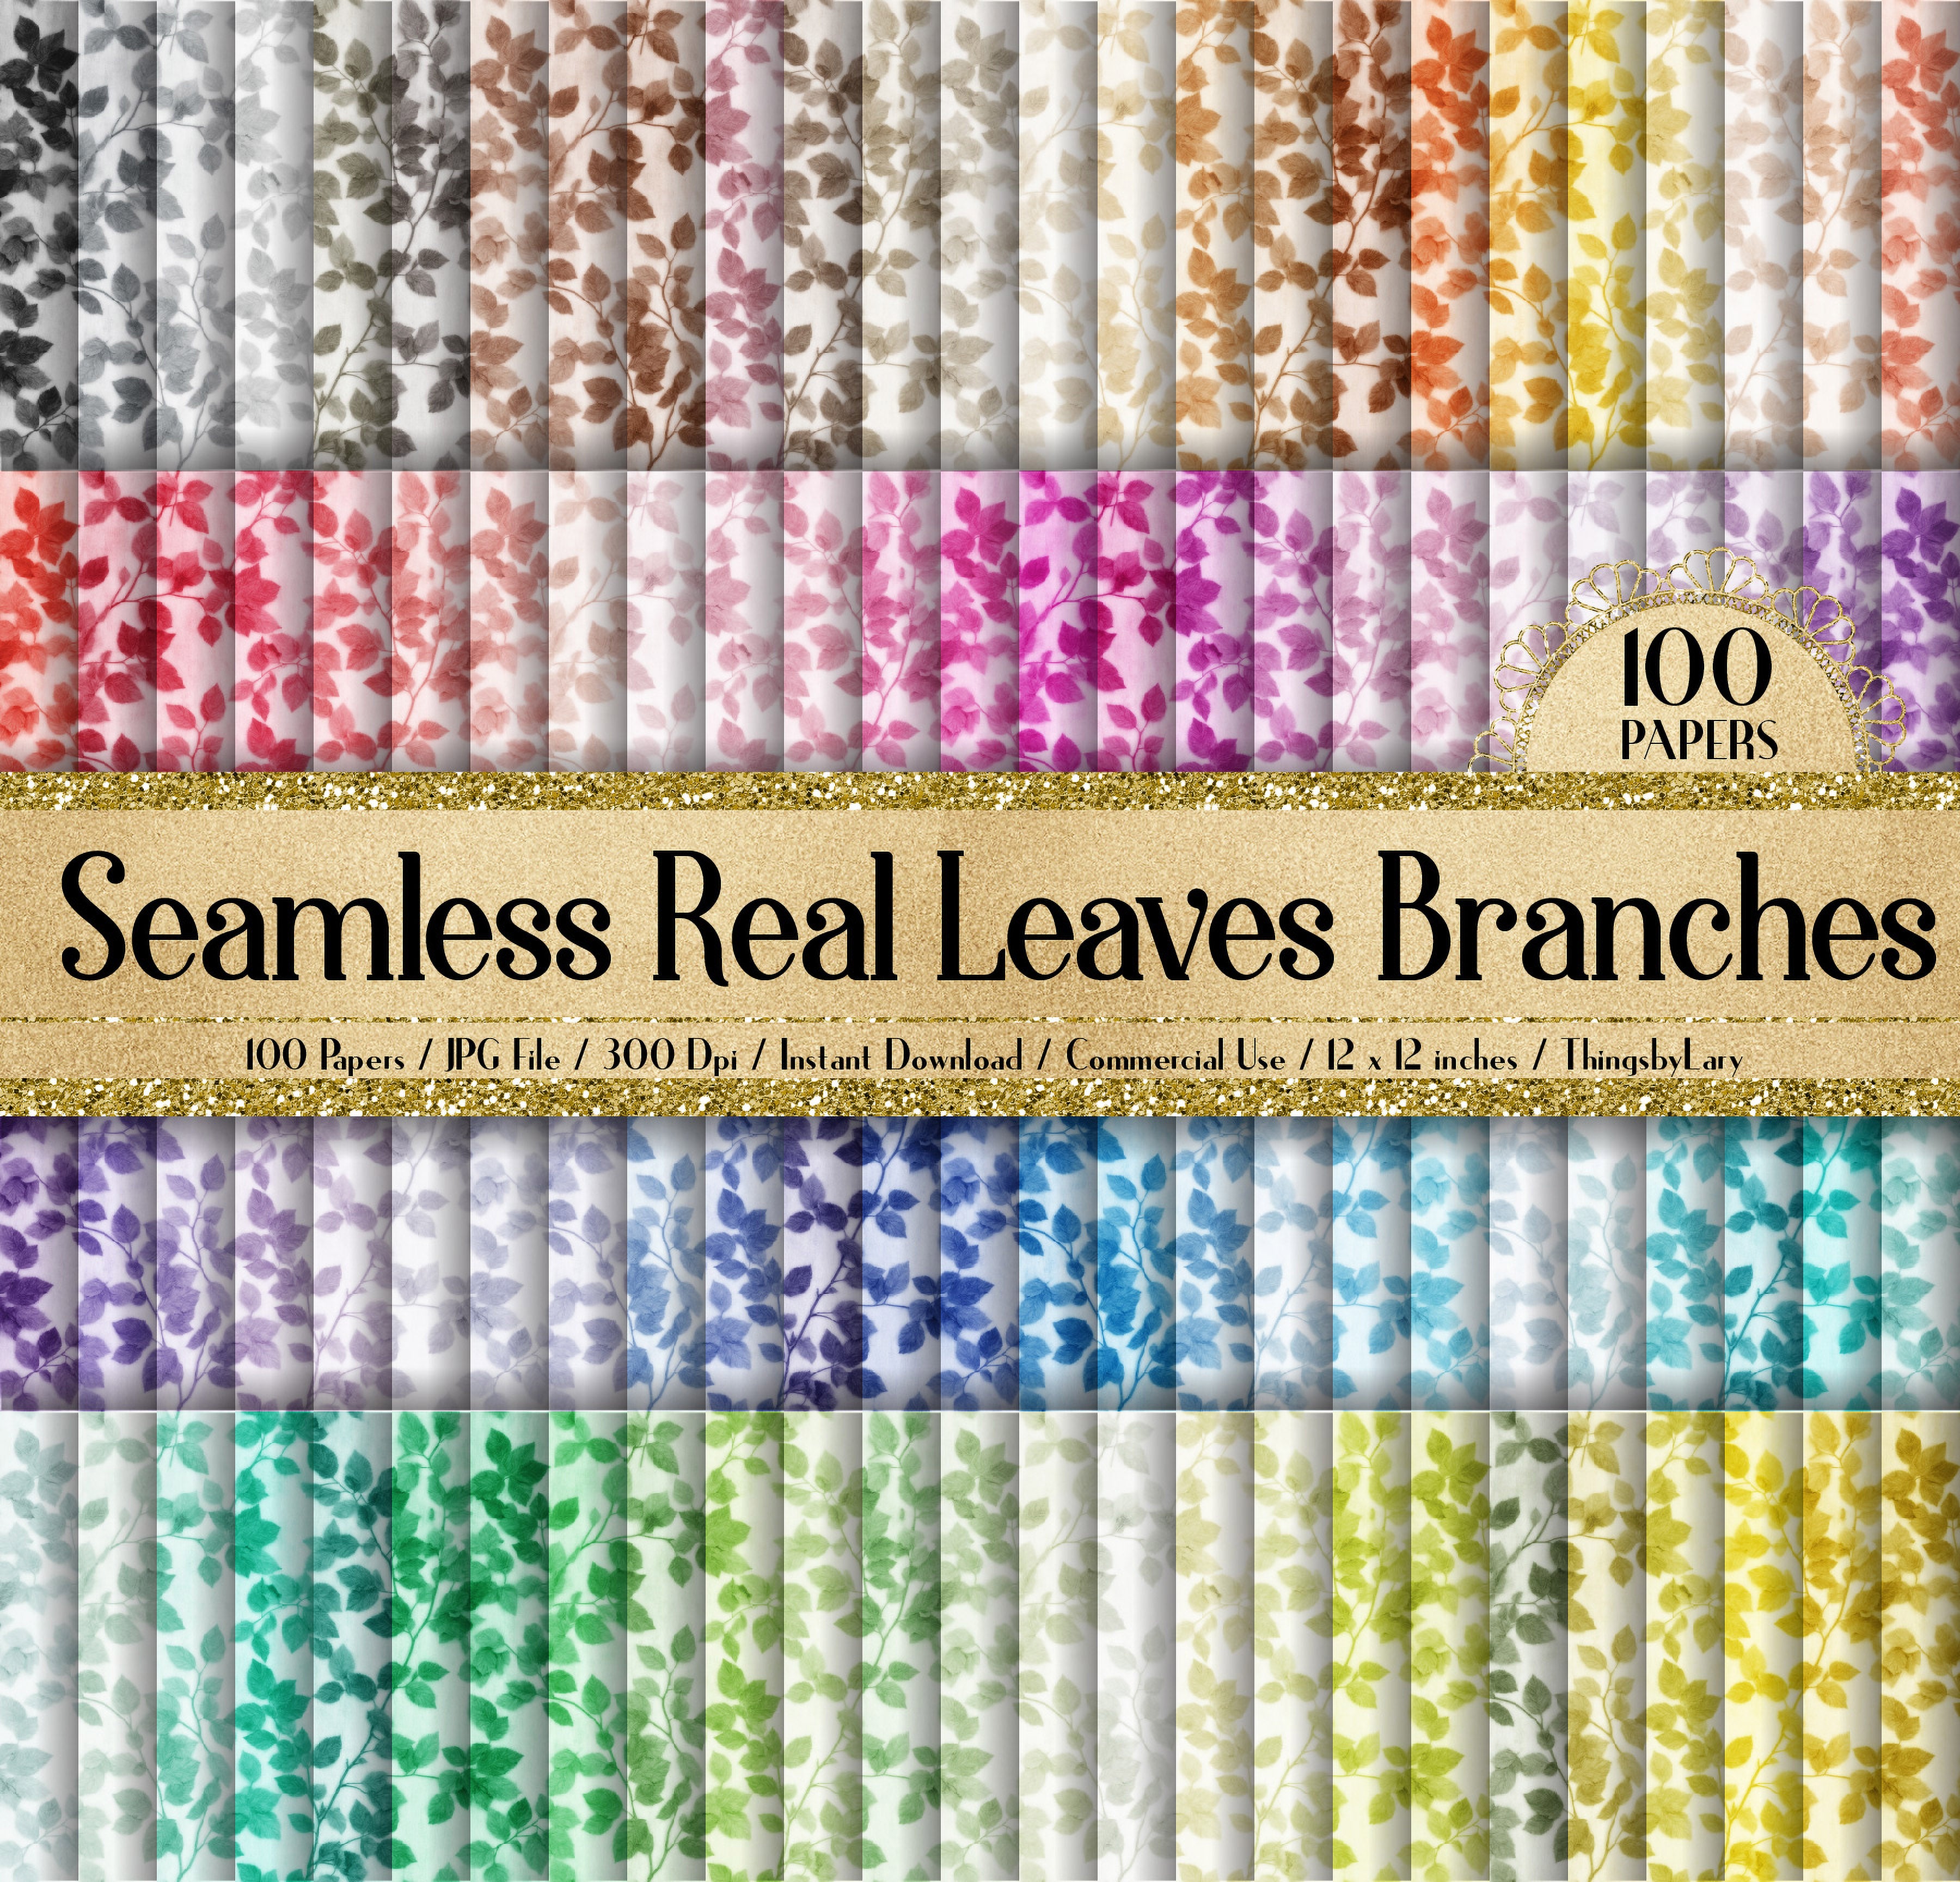 100 Seamless Real Leaves Branches Digital Papers